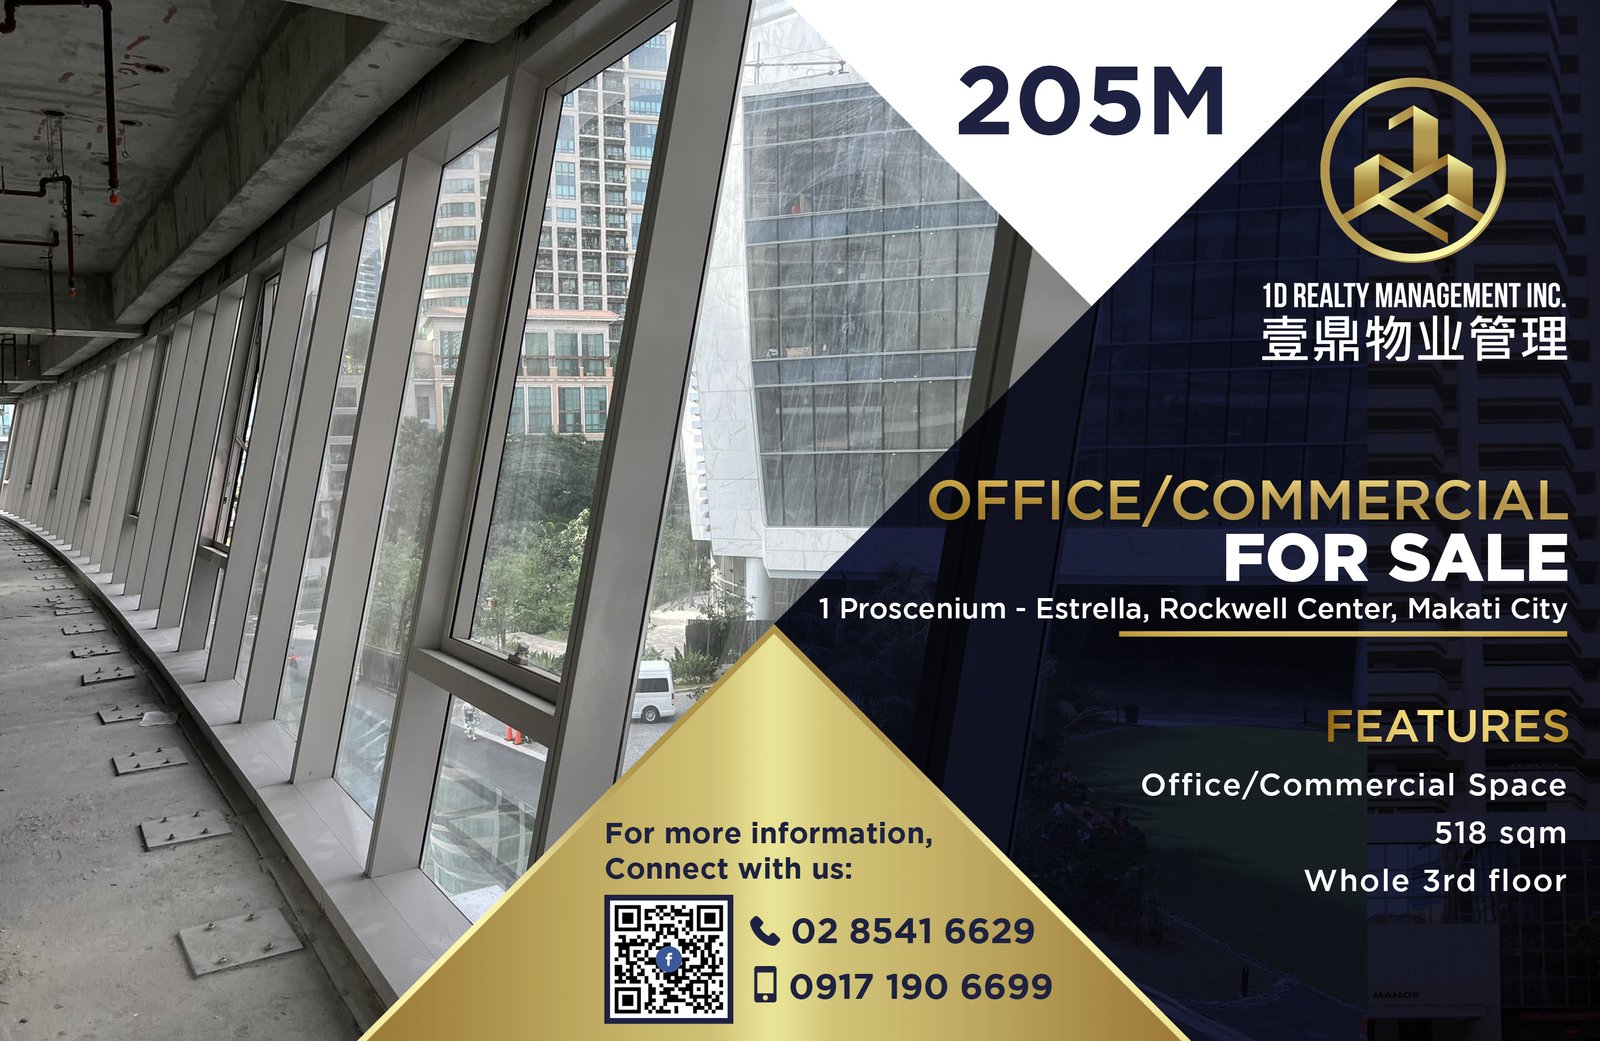 FOR SALE OFFICE/COMMERCIAL SPACE - 1 Proscenium - Estrella, Rockwell Center, Makati City